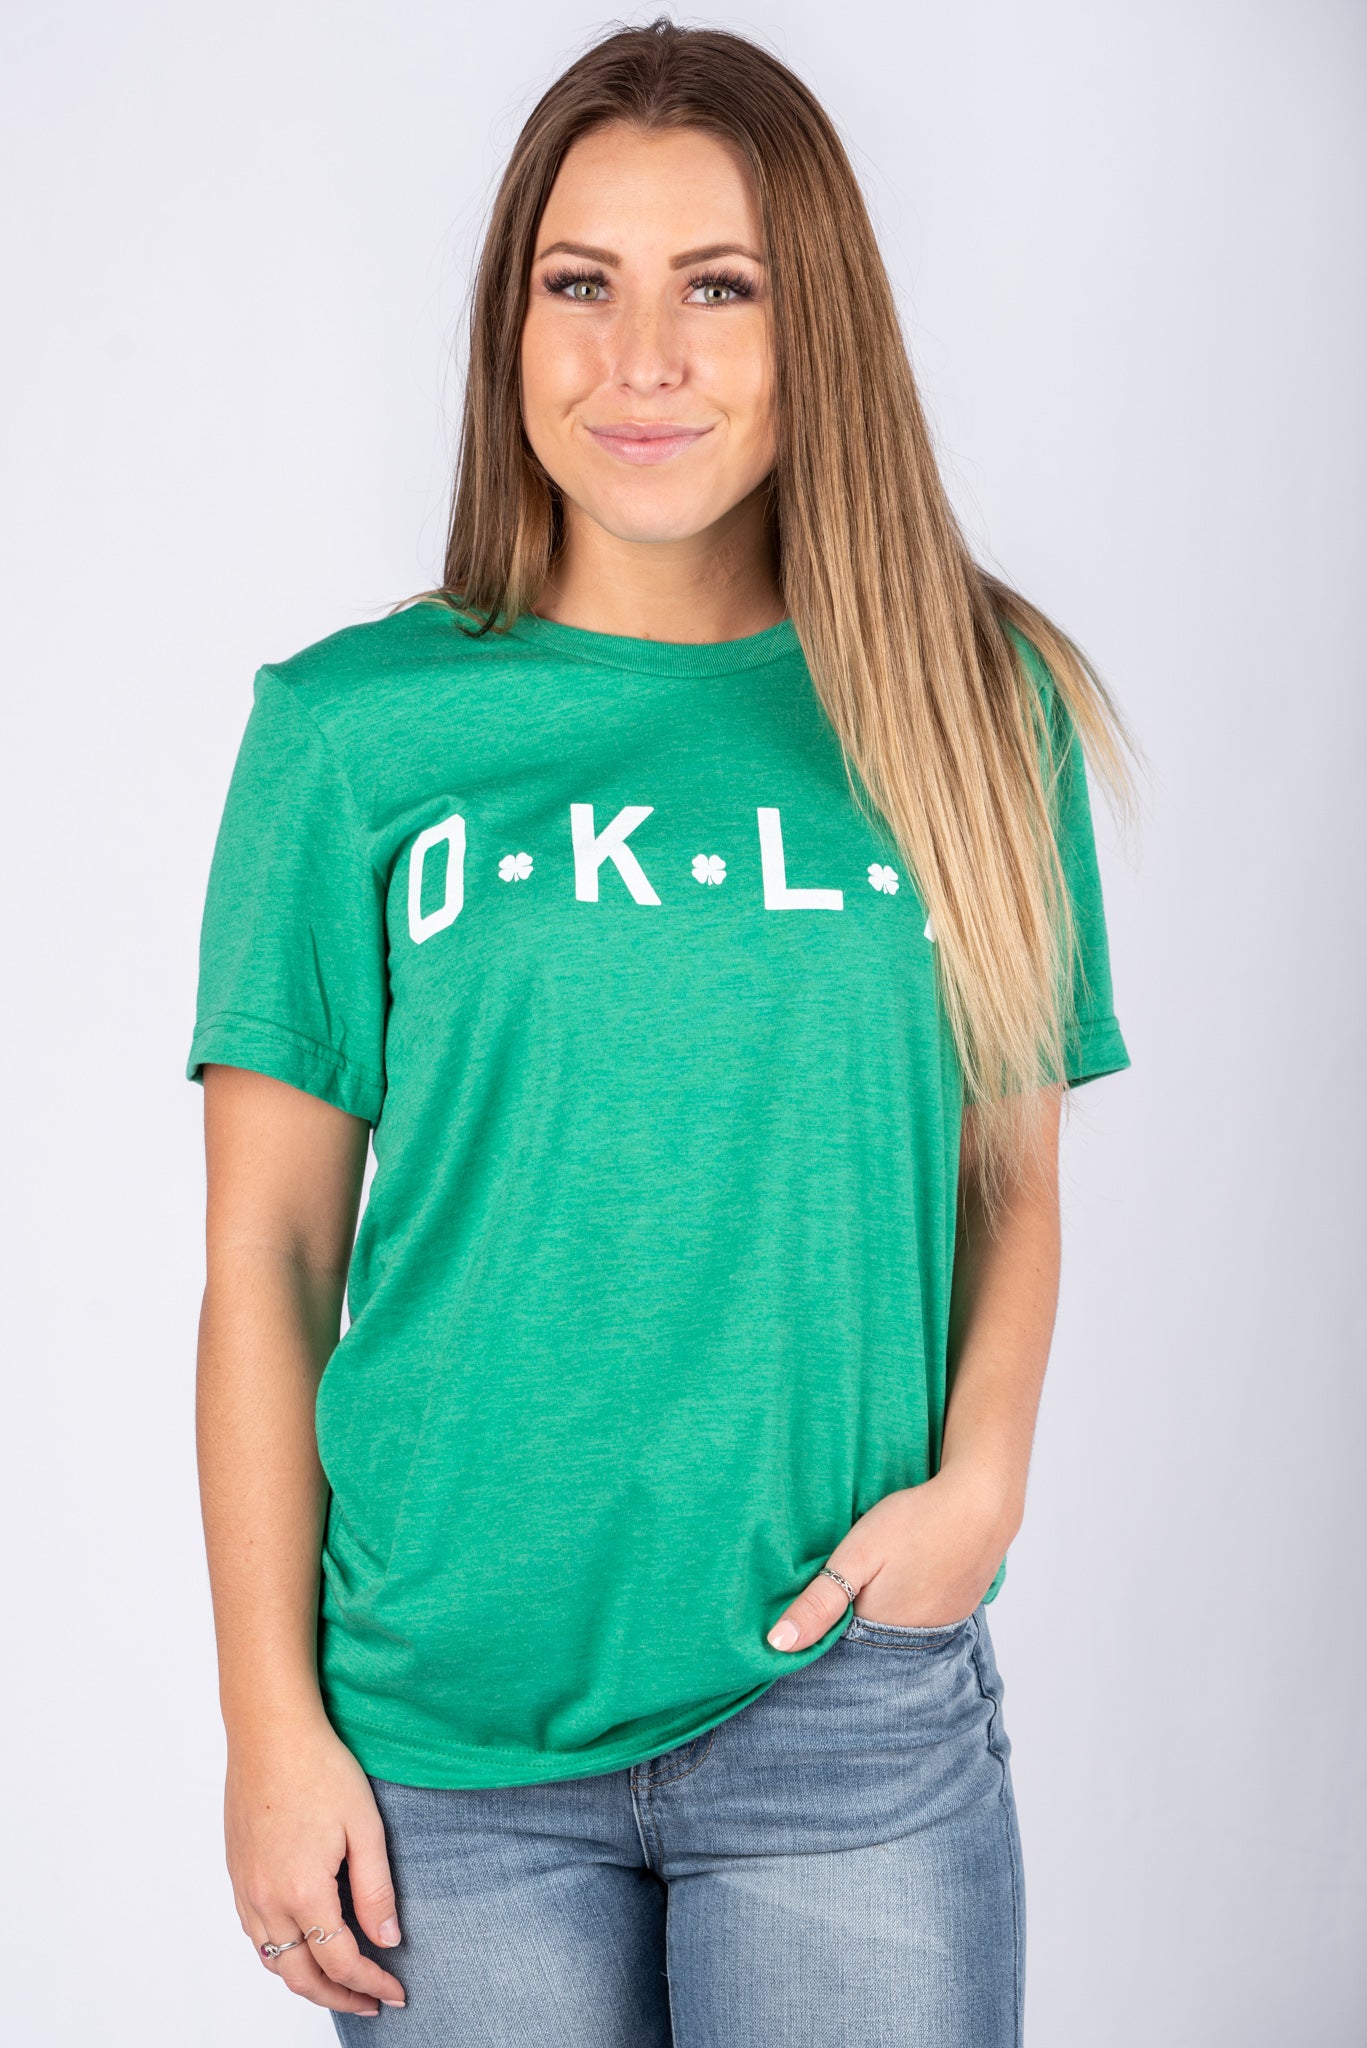 OKLA clovers unisex short sleeve t-shirt green - Trendy T-shirts - Fashion Graphic T-Shirts at Lush Fashion Lounge Boutique in Oklahoma City